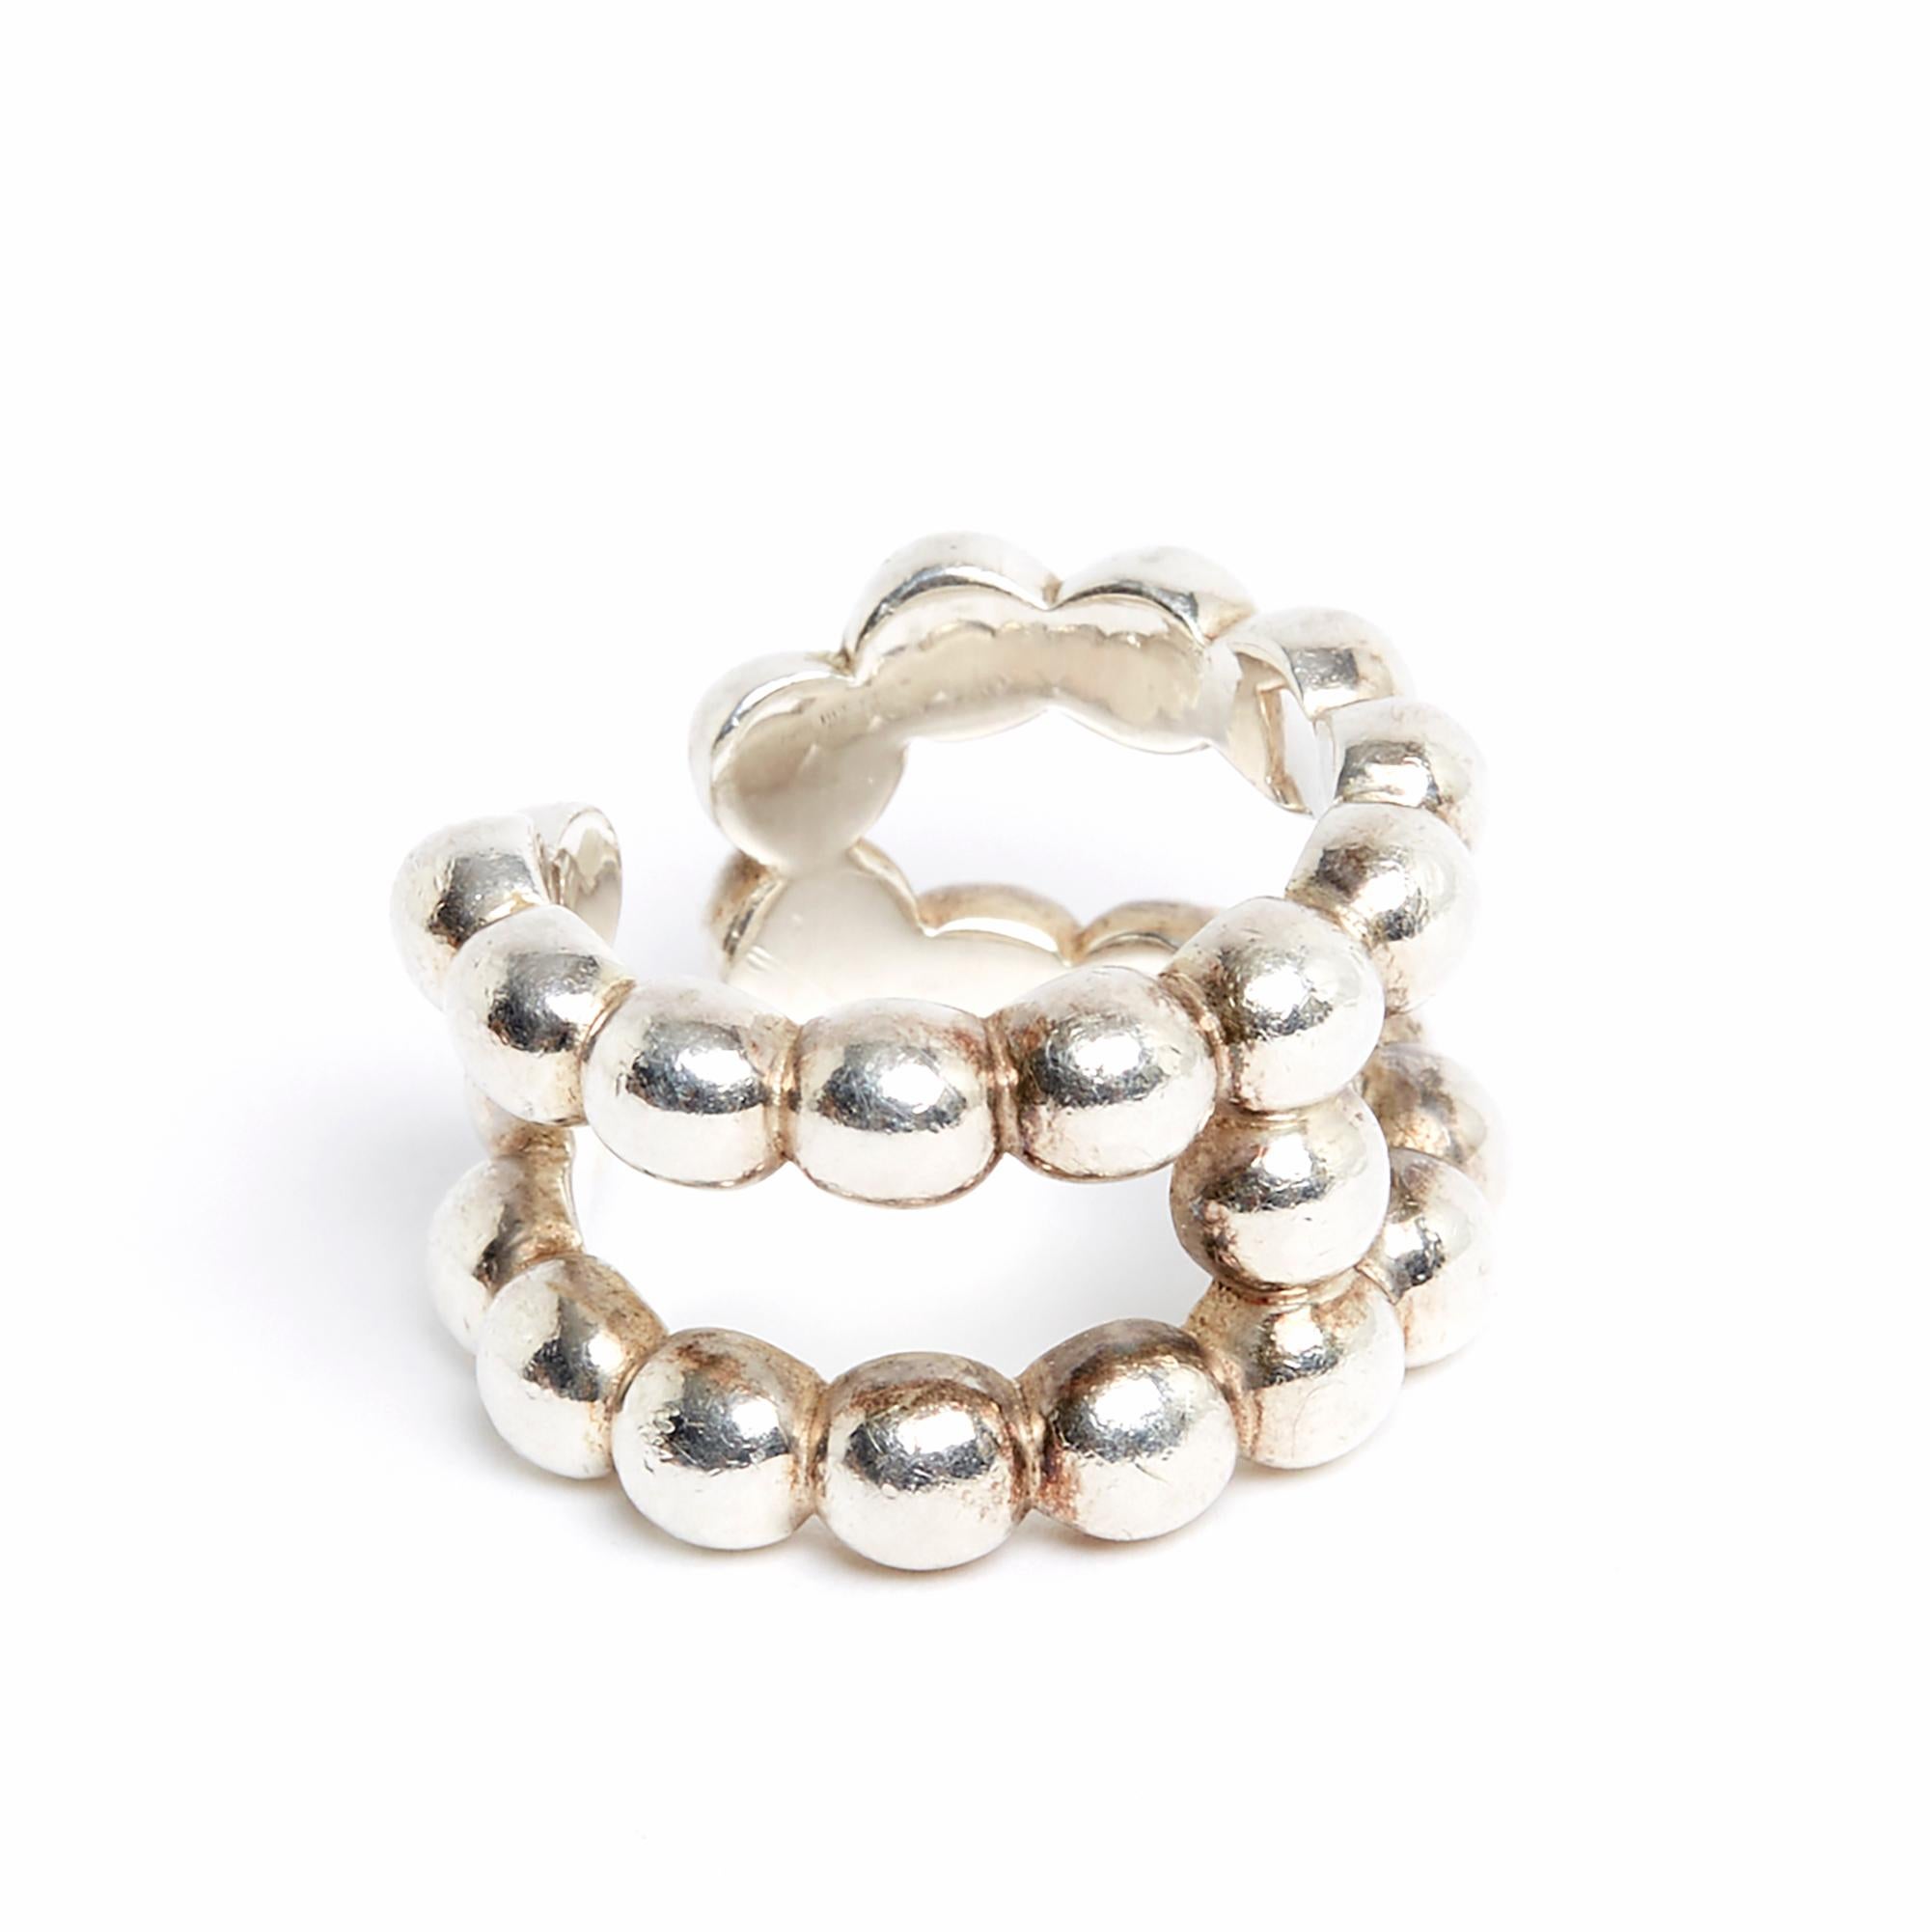 Hermès Osmose model ring in 925/1000 silver with pearl pattern, size 56 (delicately adjustable). Ring width 1.4 cm. The ring has been worn but it remains in very good condition, iconic super chic in this pattern